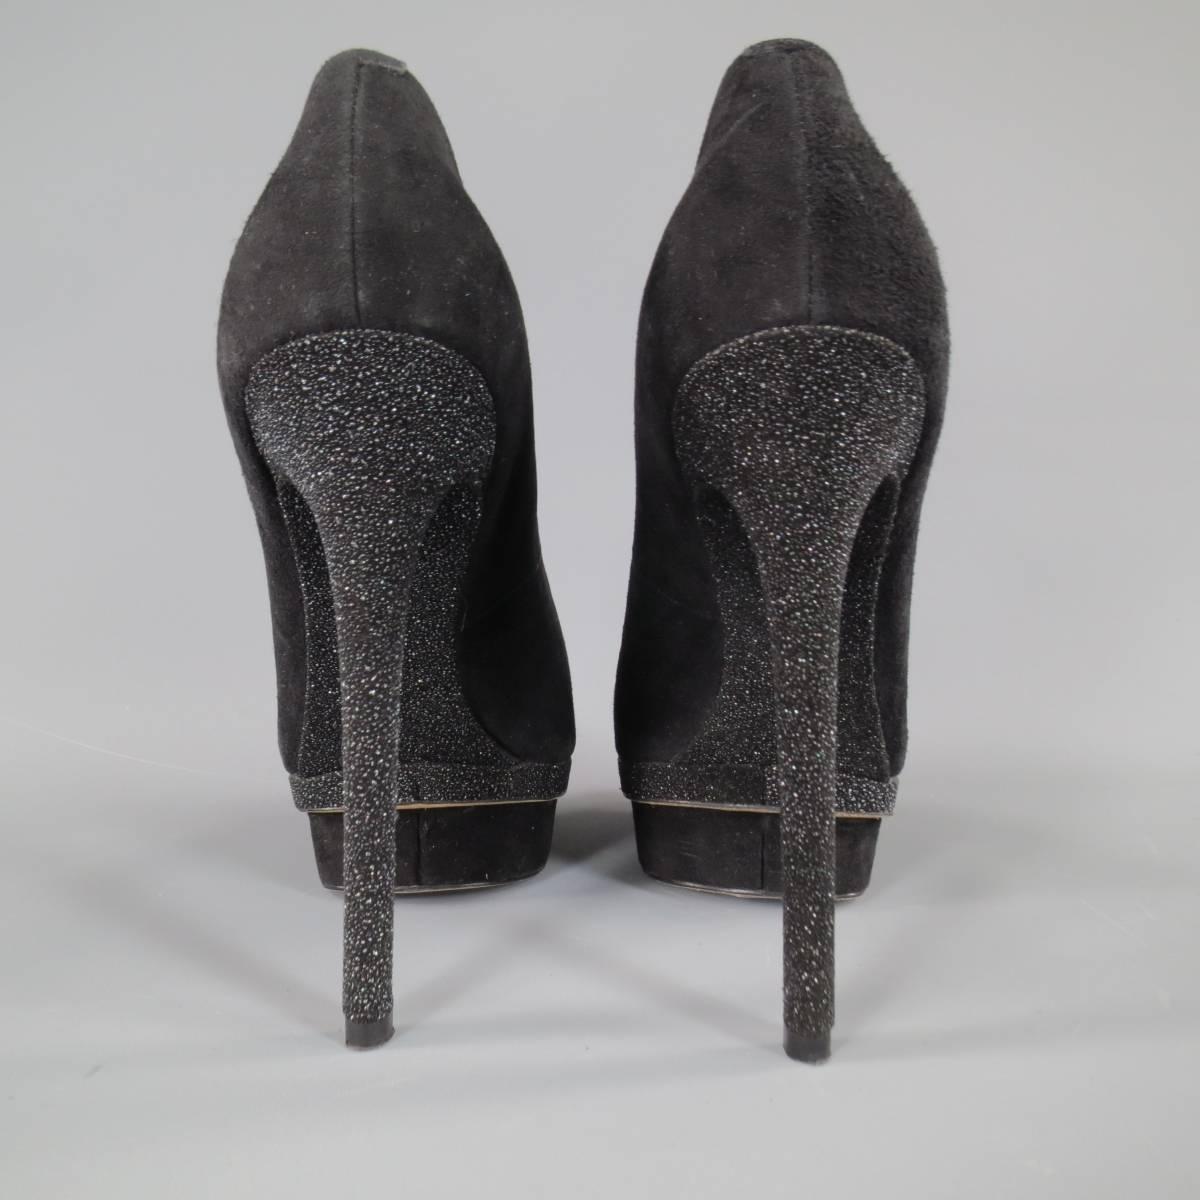 B BRIAN ATWOOD Size 8 Black Suede Stacked Glitter Peep Toe Platform Pumps 4